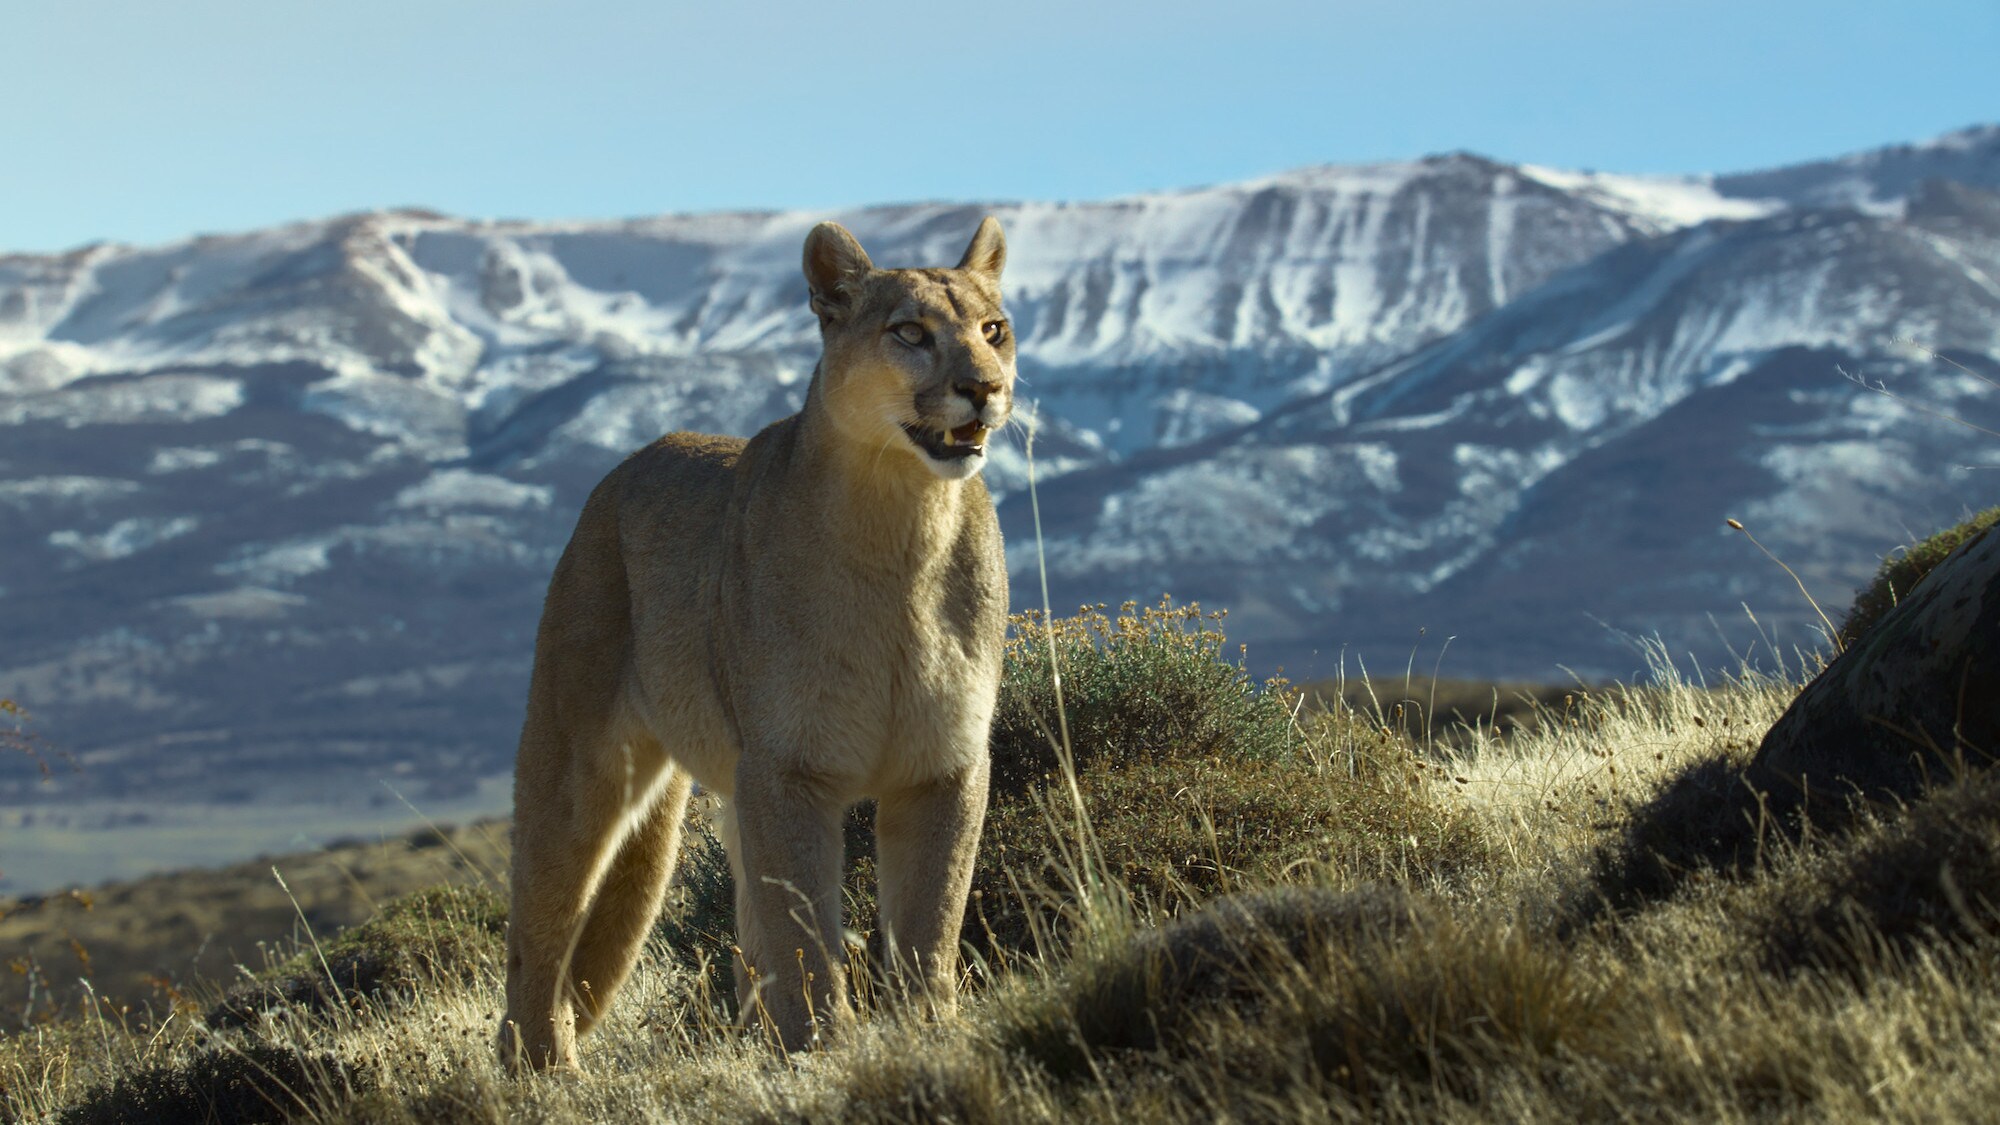 A Puma in Patagonia. (National Geographic for Disney+/John Shier)